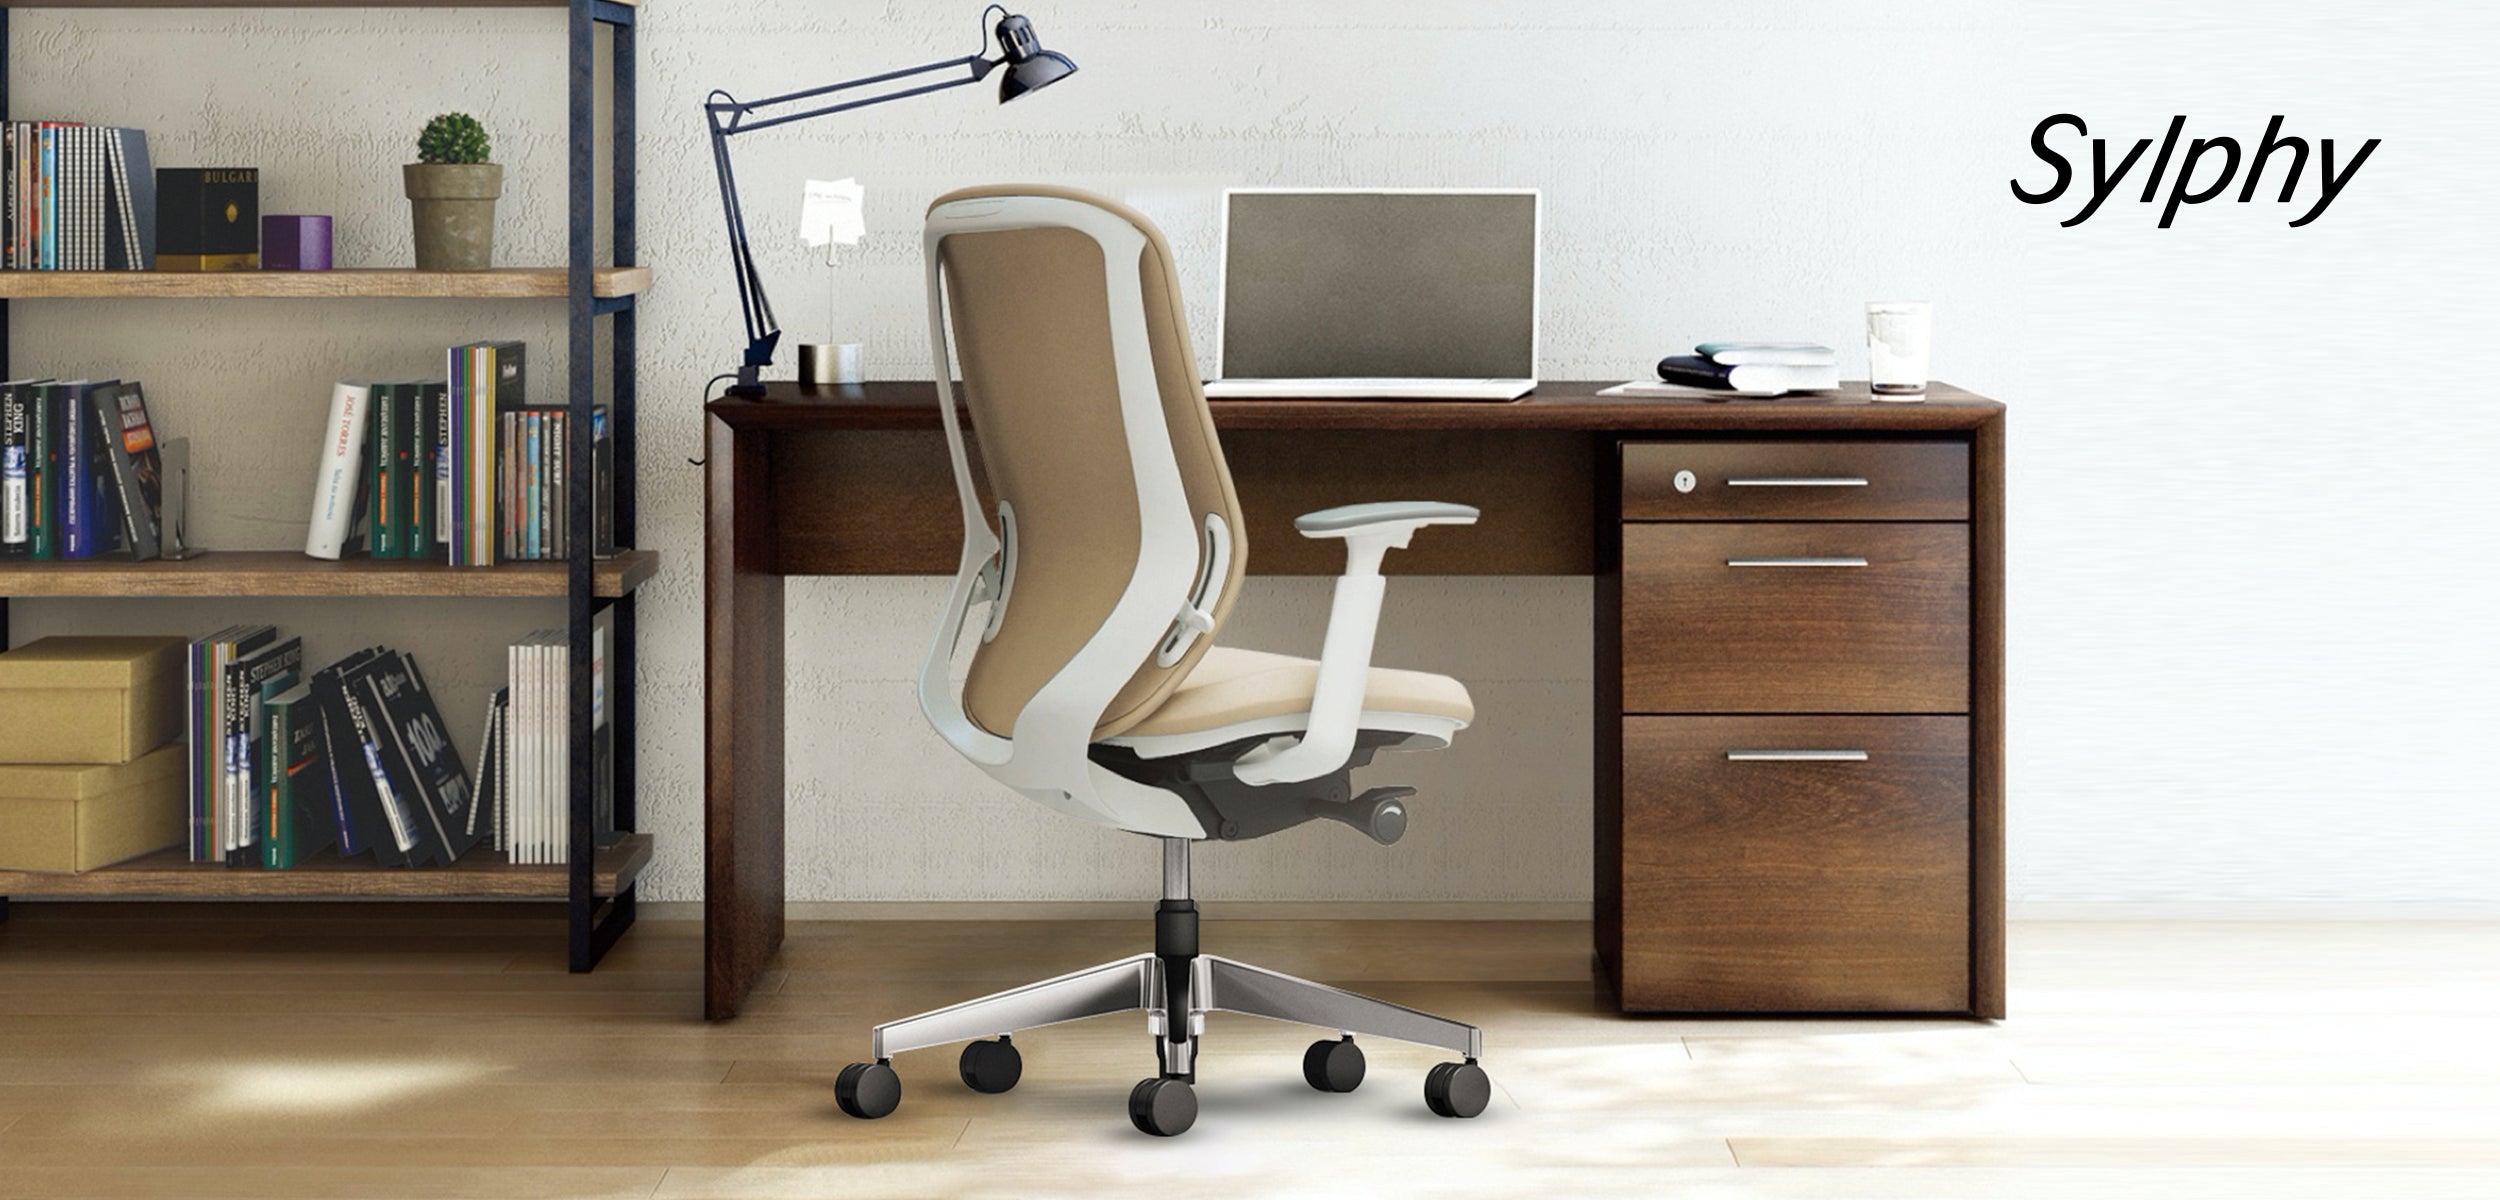 Sylphy work chair in home setting